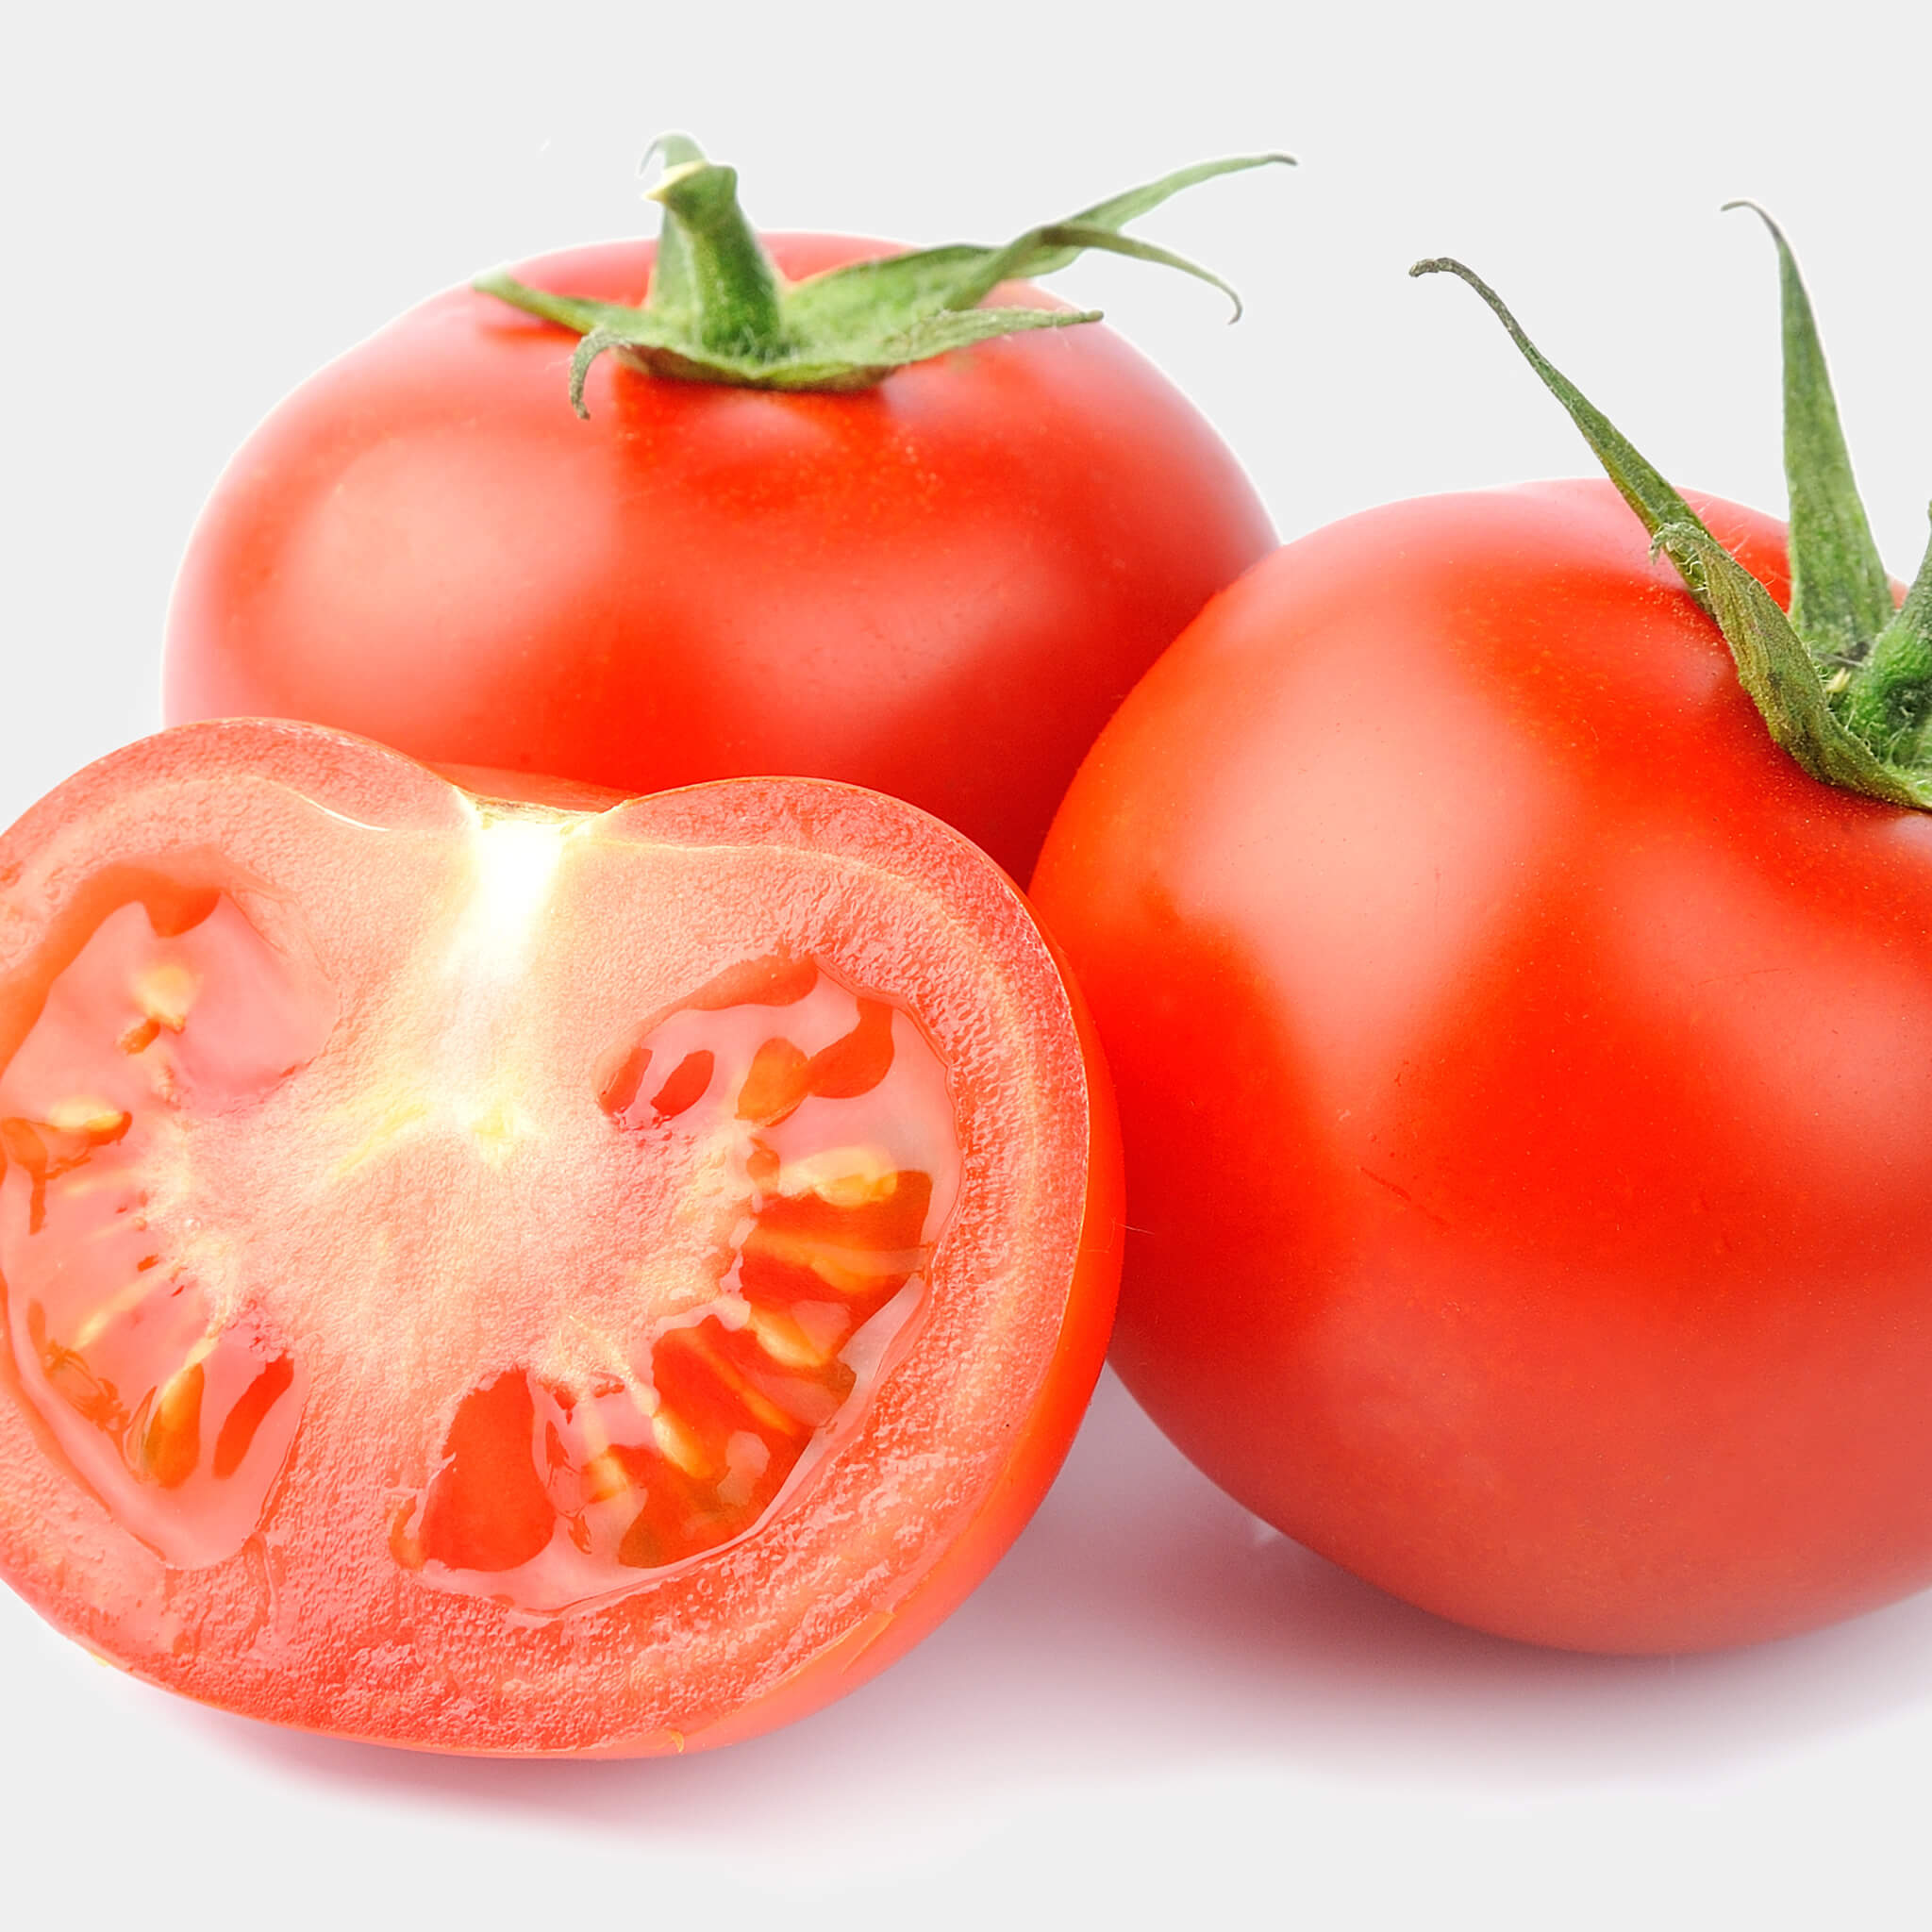 Product Page Key Ingredients: Tomato